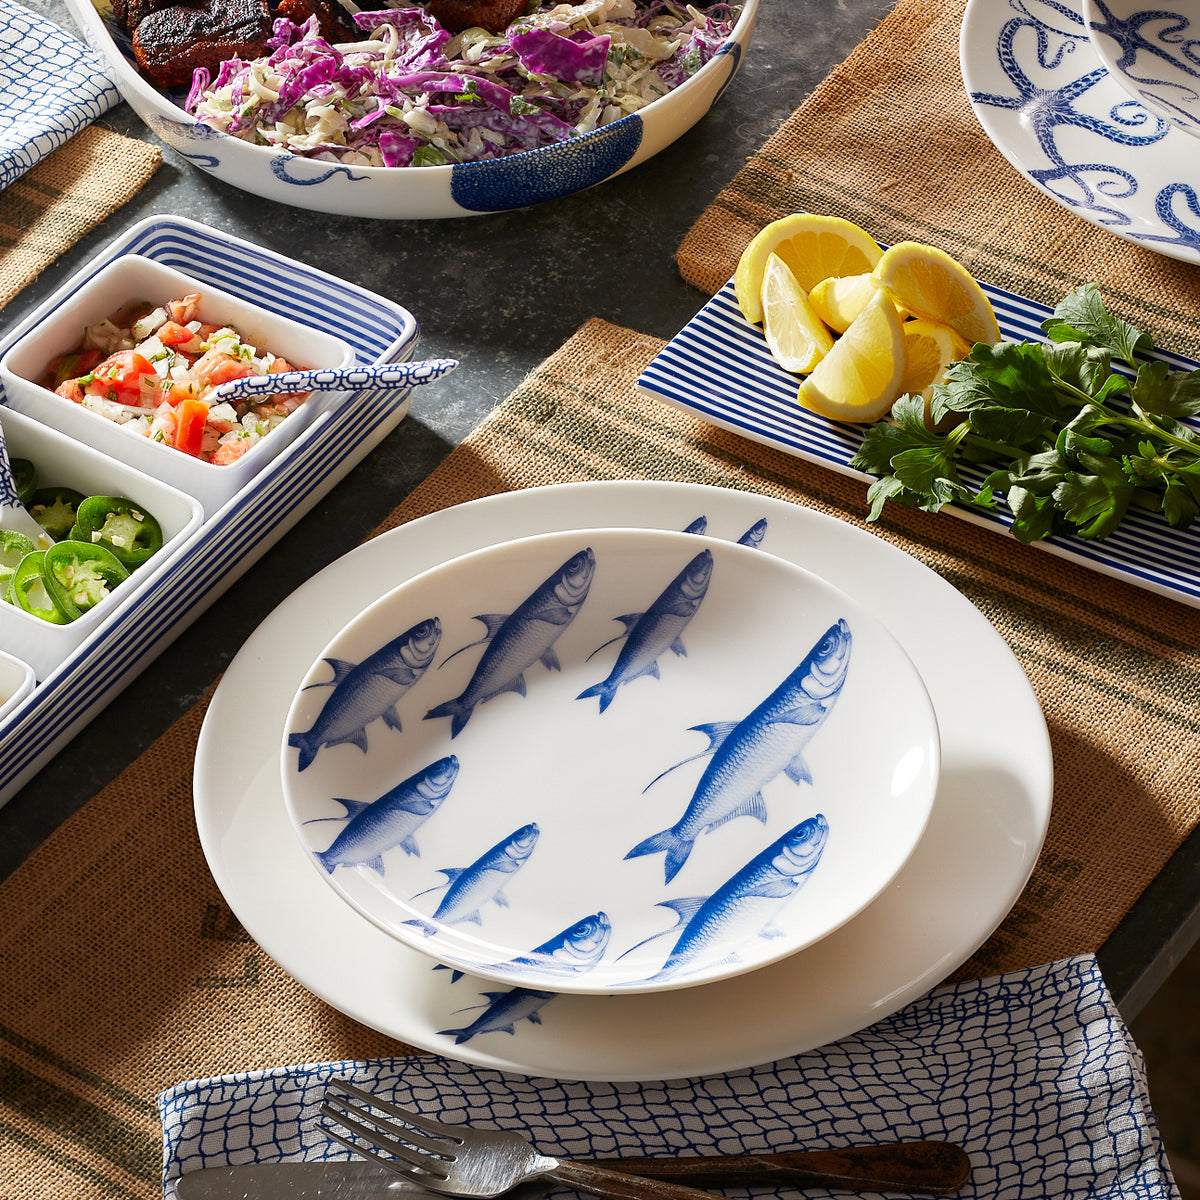 A table setting featuring a School of Fish Coupe Dinner Plate from Caskata Artisanal Home, surrounded by dishes with food, lemons, and herbs.